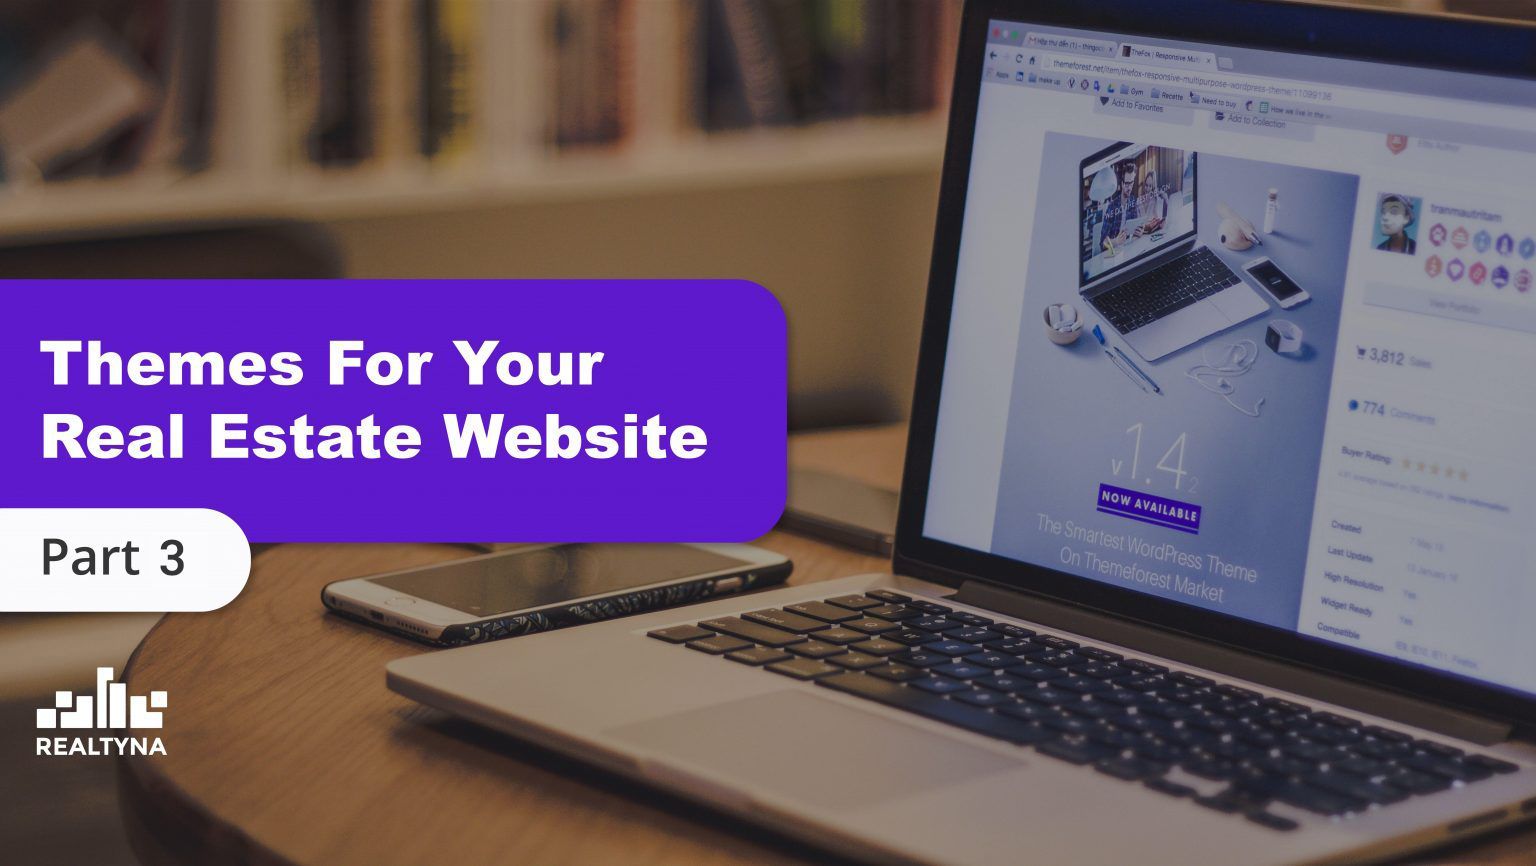 Themes for Your Real Estate Website (Part 3)